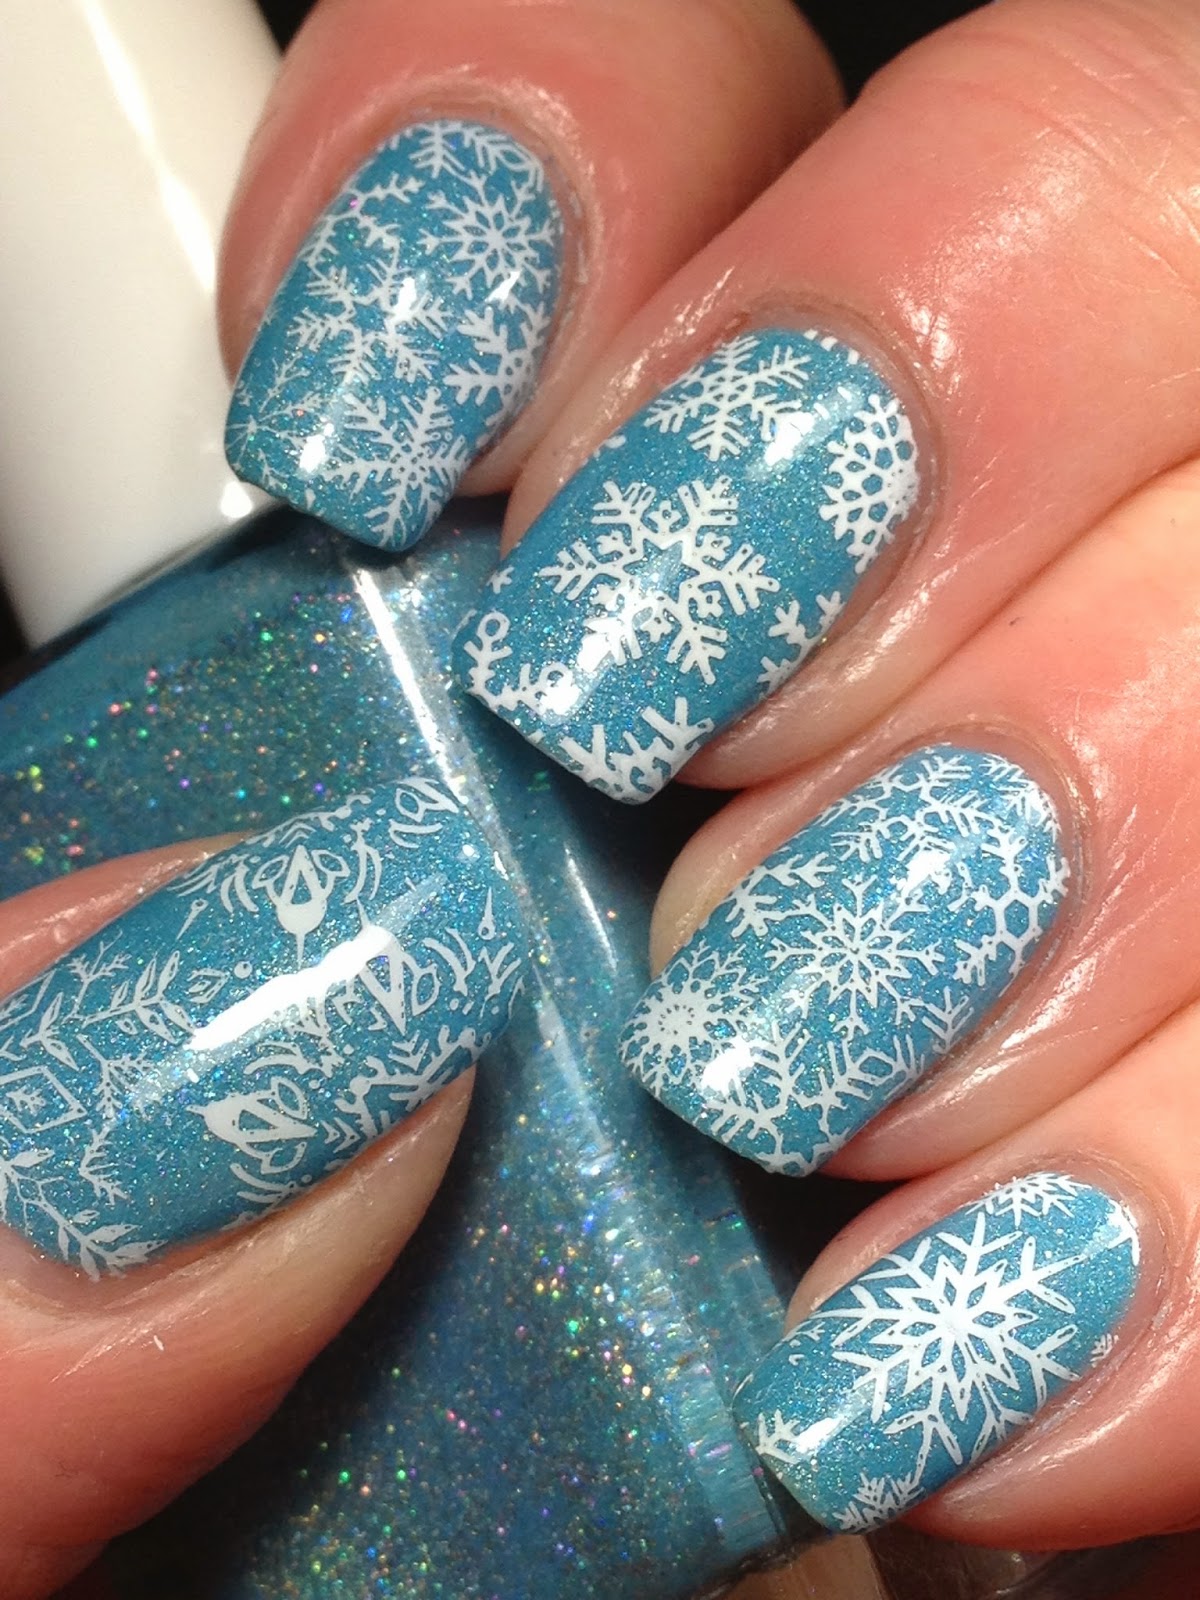 Glam Polish Break the Ice with Snowflakes | Canadian Nail Fanatic ...